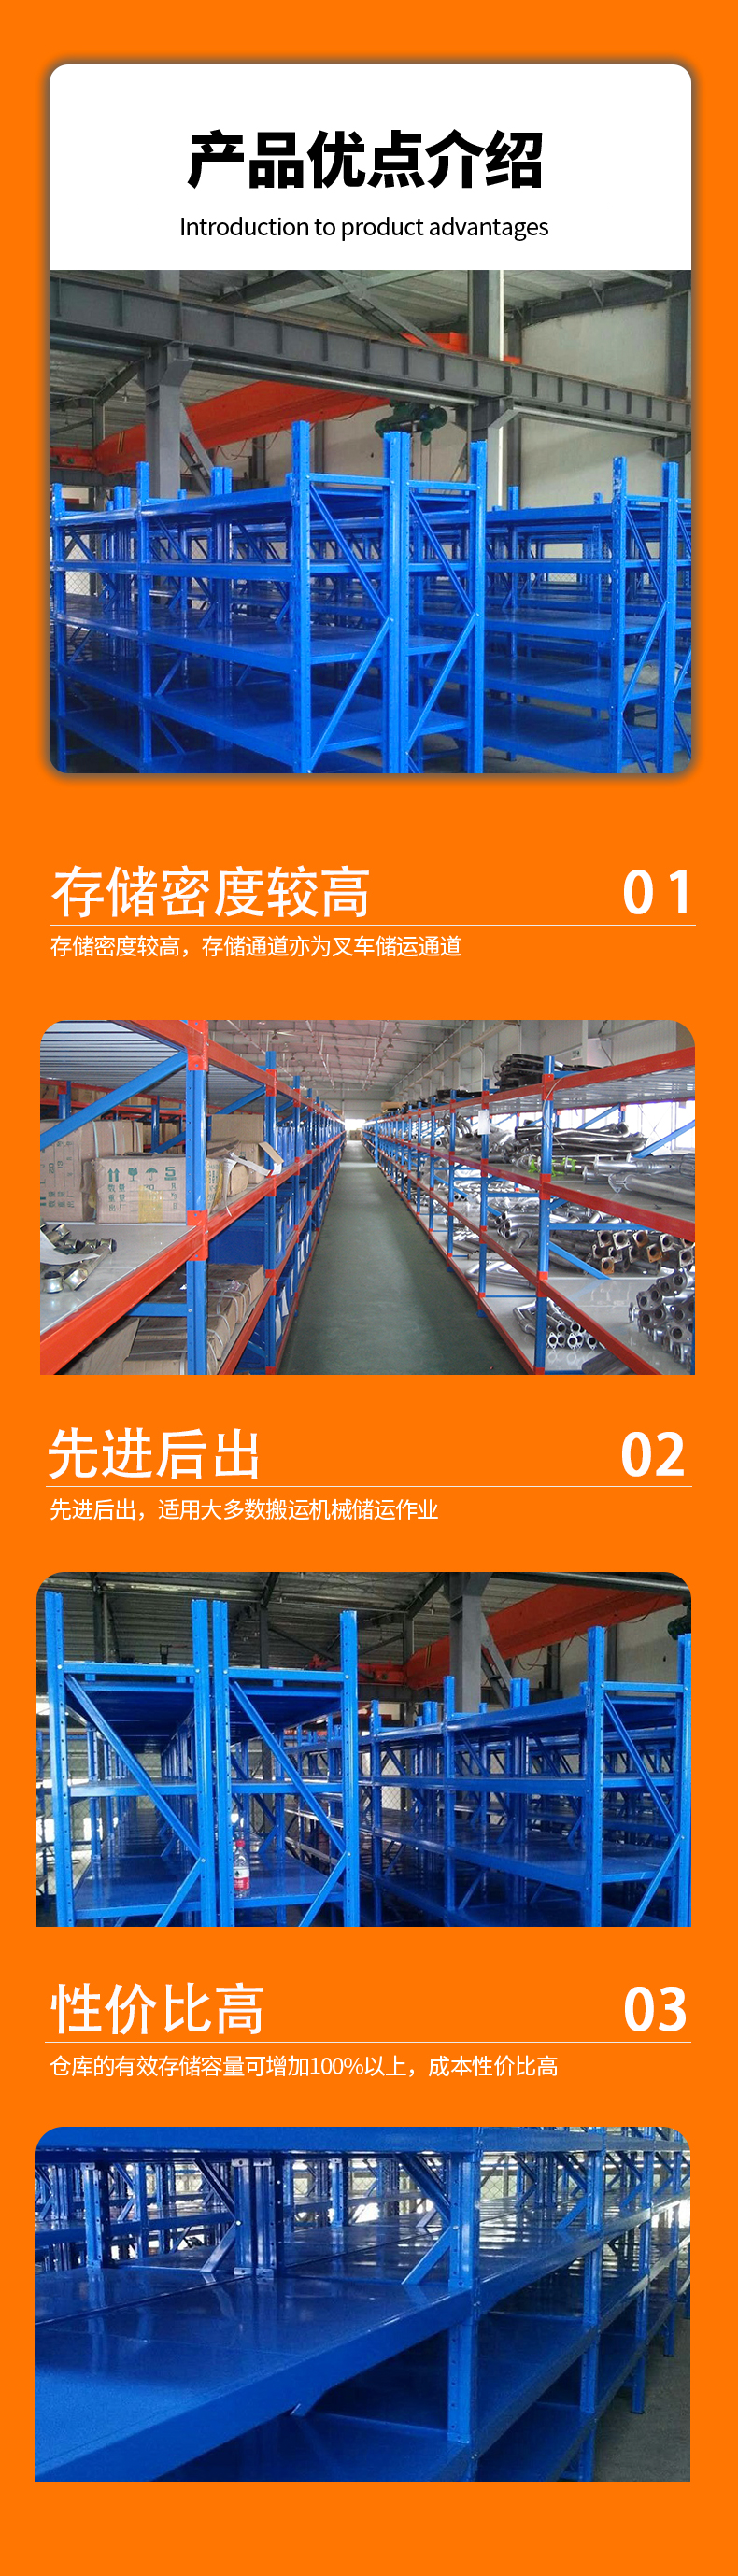 Customized and durable medium shelf shelves with layered structure according to demand, Coryson